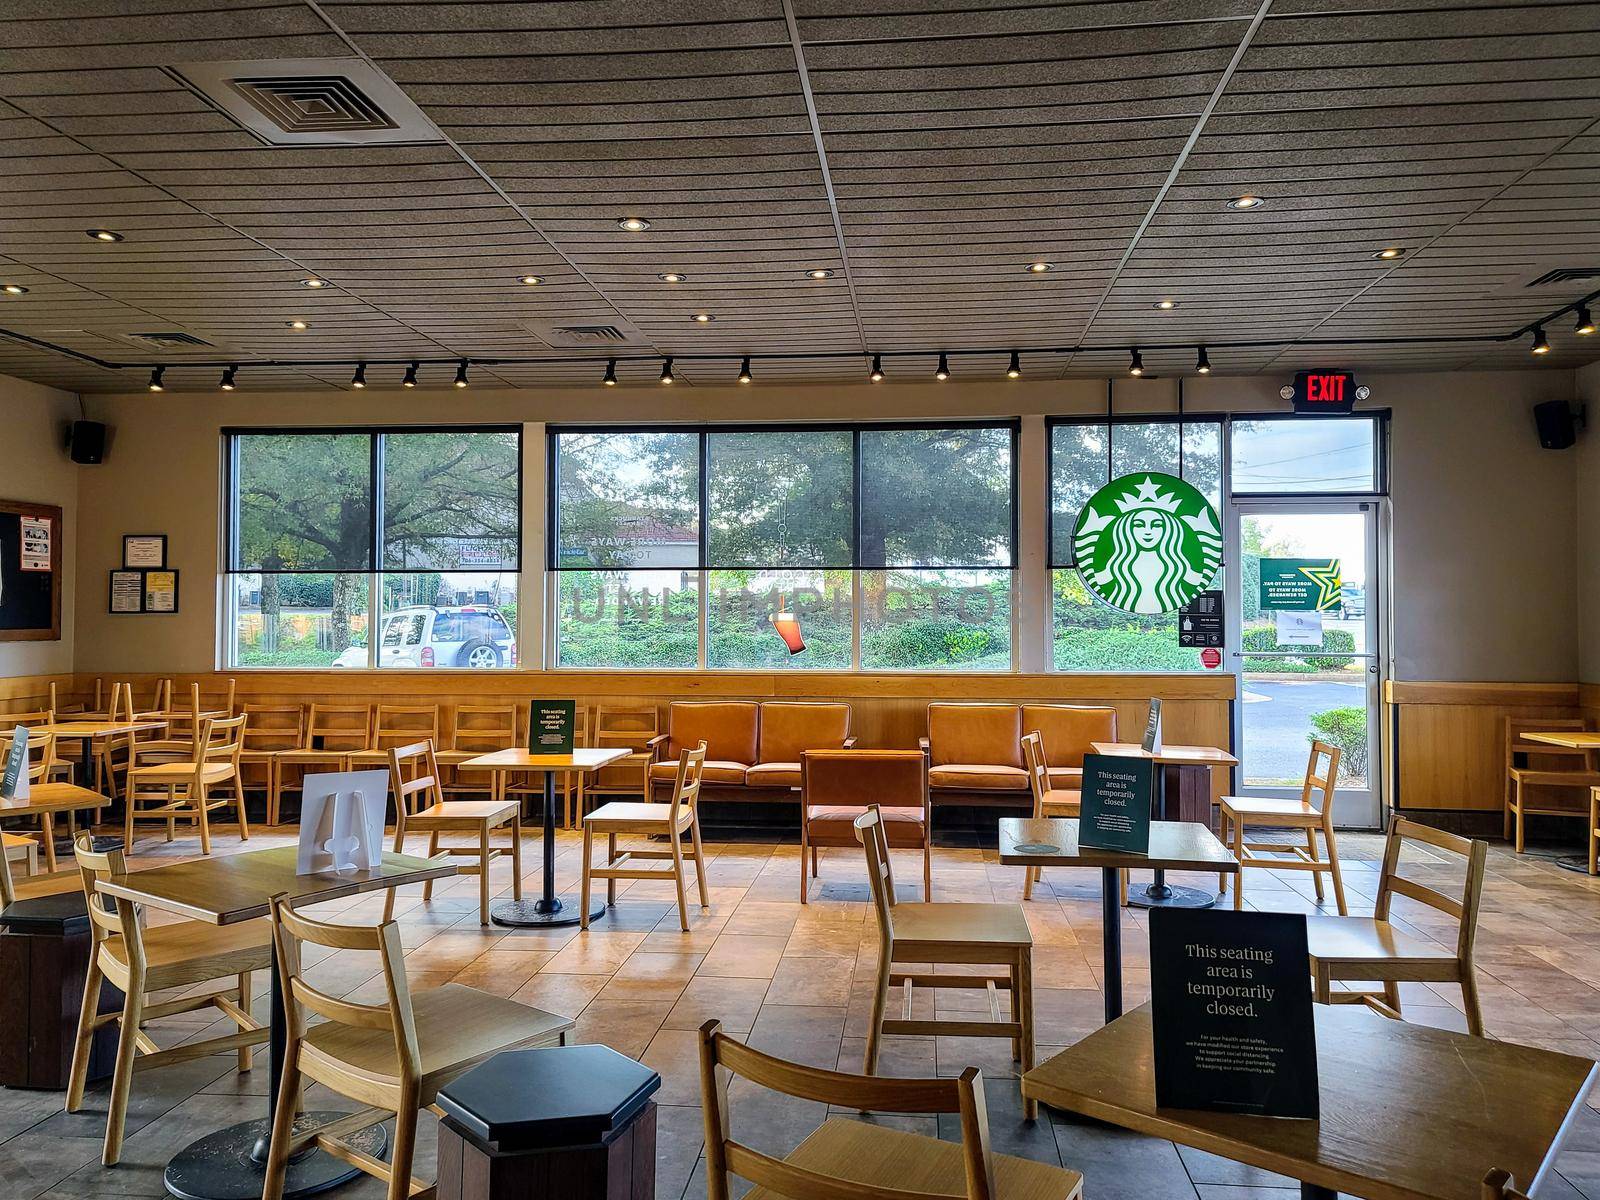 Athens, GA / the United State -  Oct 27, 2020 : Inside view and interior of Starbucks shop, Drive Thru coffee shop